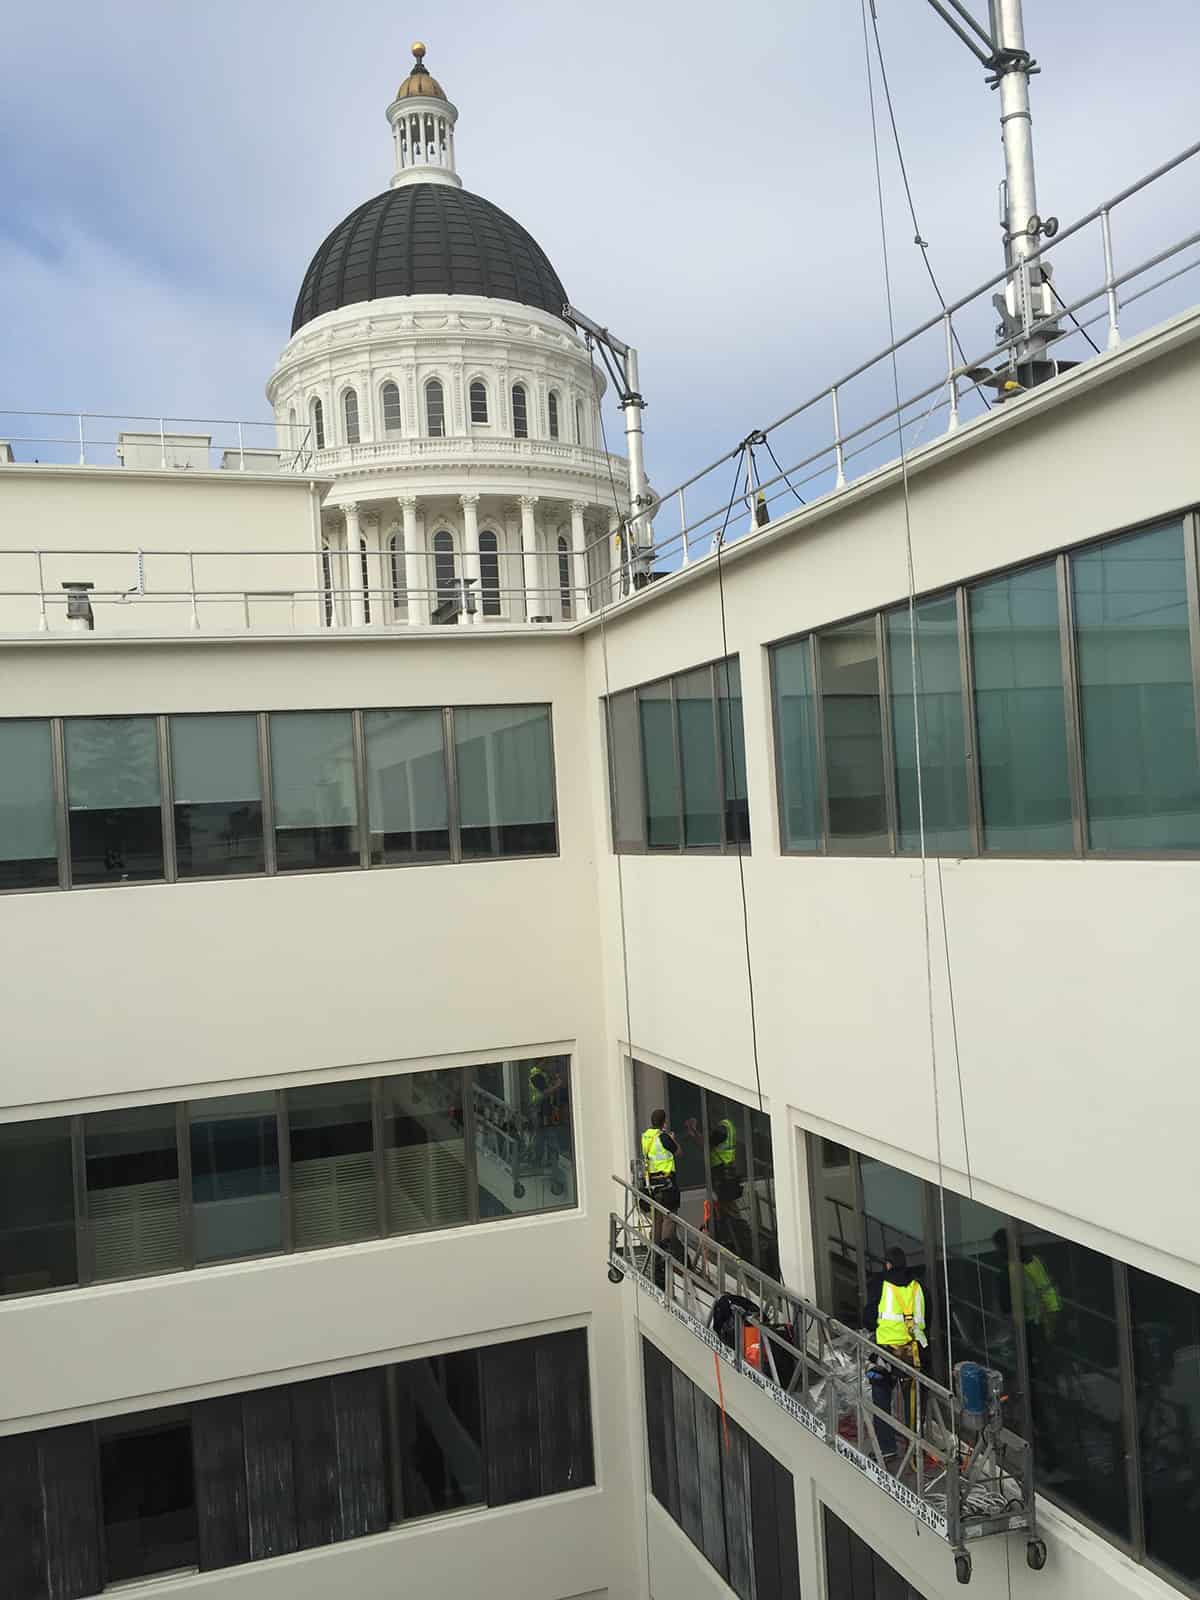 The ClimatePro team recently completed this interesting project in Sacramento, CA. It is another excellent example of the flexibility and practicality of window film.